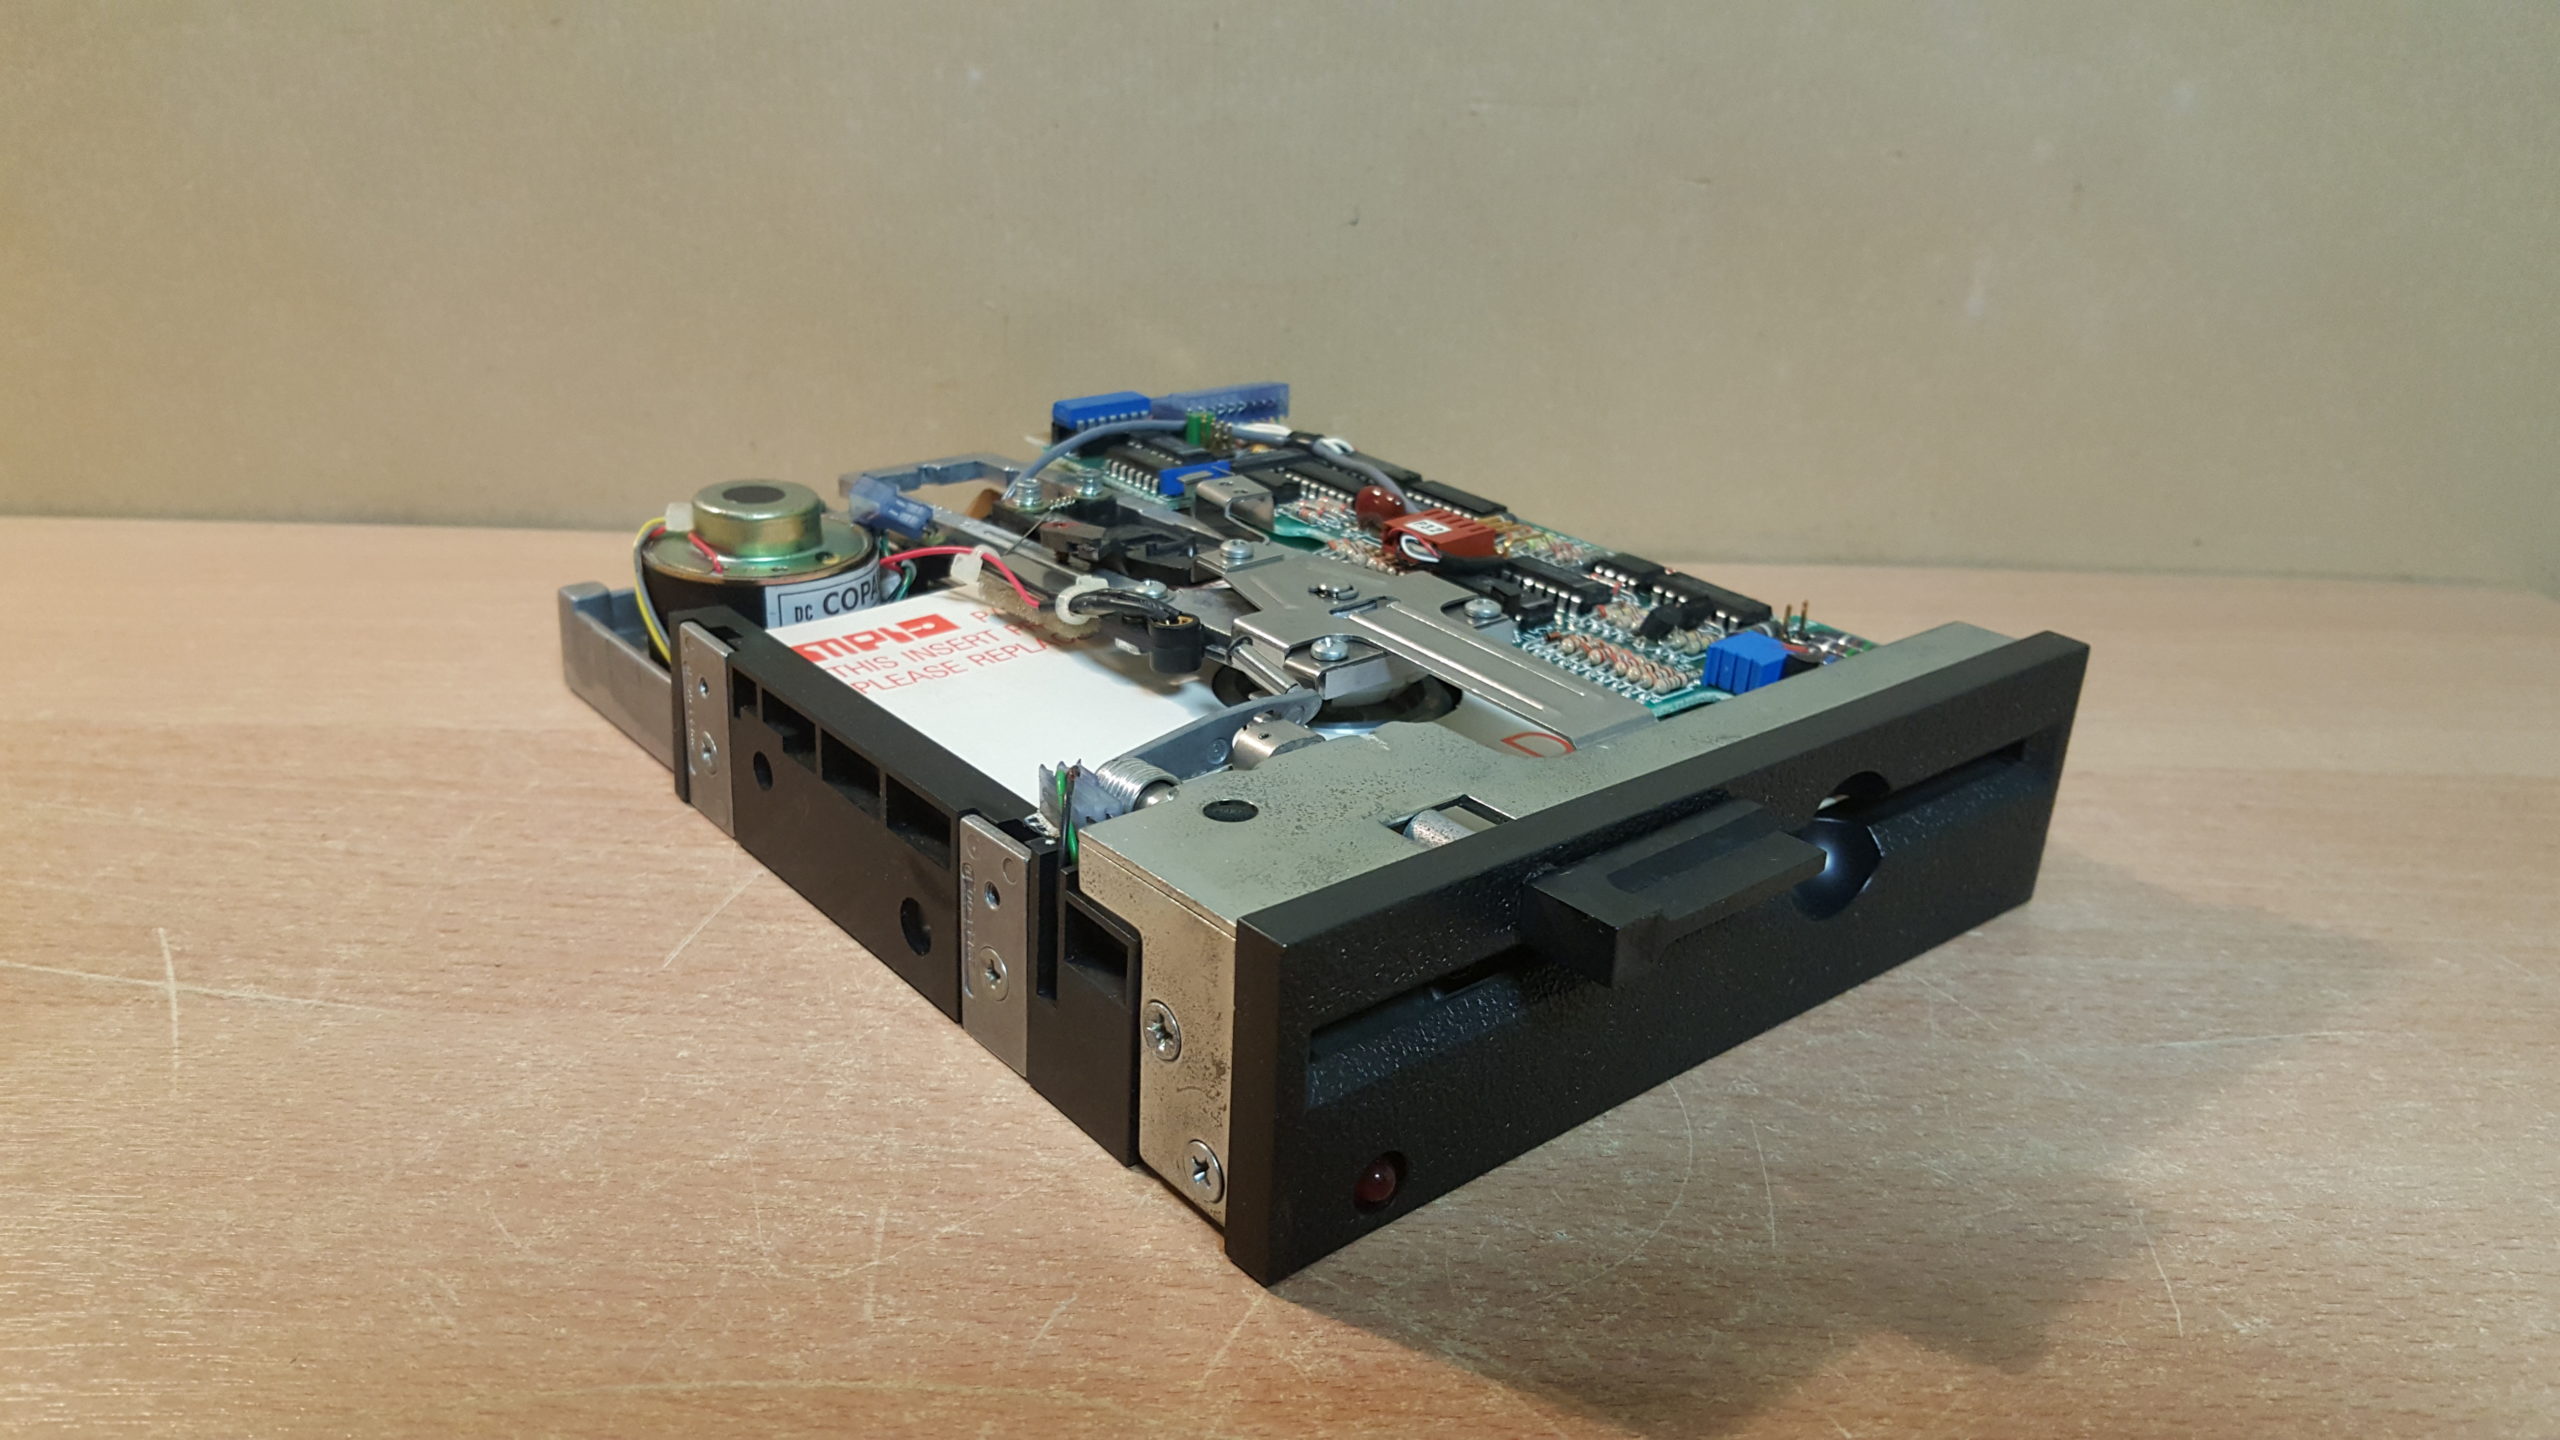 NEC FD1231H 134-506791-305-4 1.44 Floppy Drive From HP Computer Date 2002.10 ! 